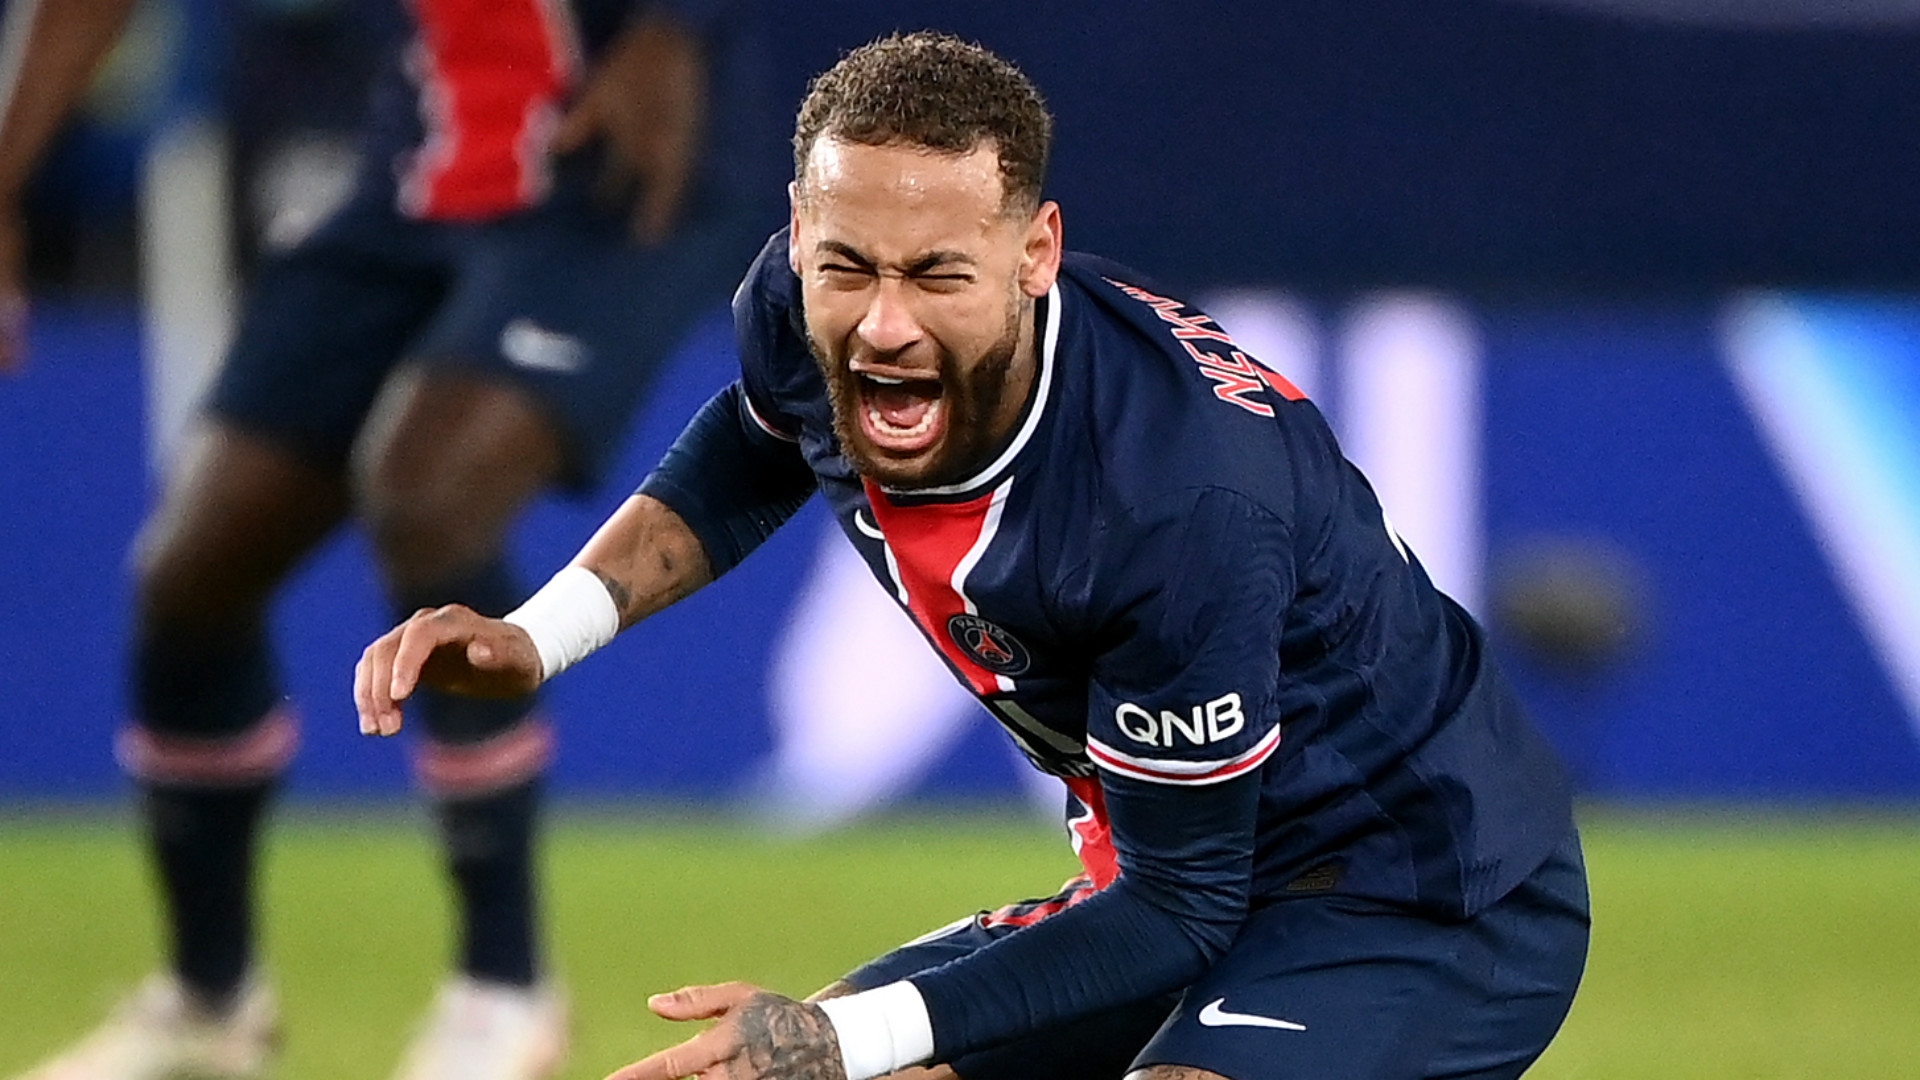 Neymar hints he has no interest in move to 'physical' Premier League as talk of new PSG contract builds